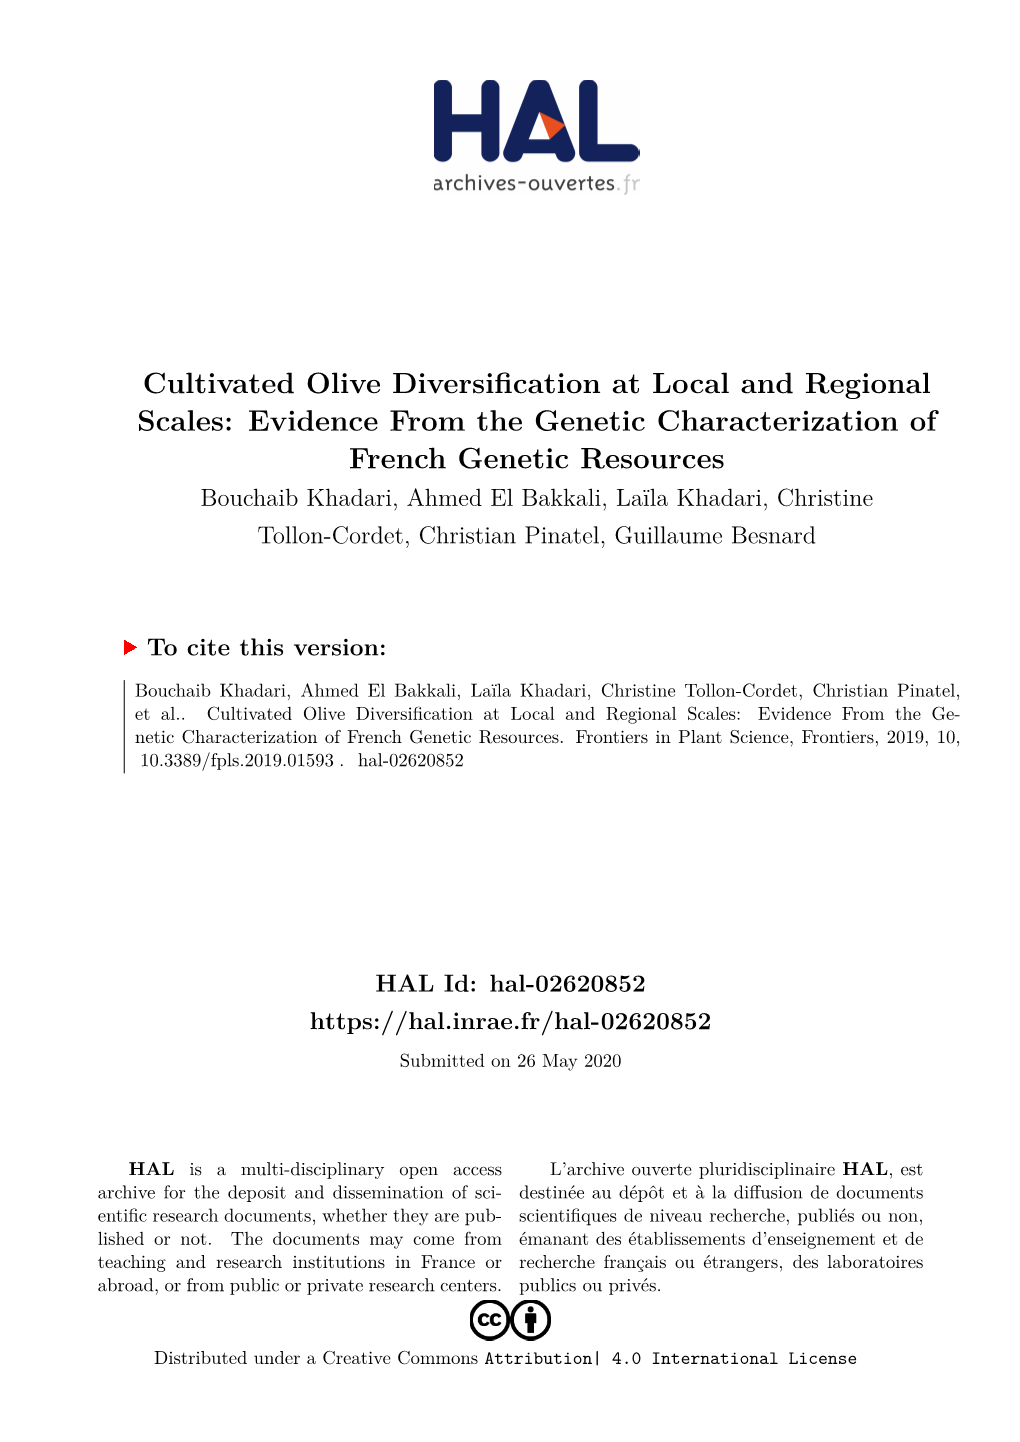 Cultivated Olive Diversification at Local and Regional Scales